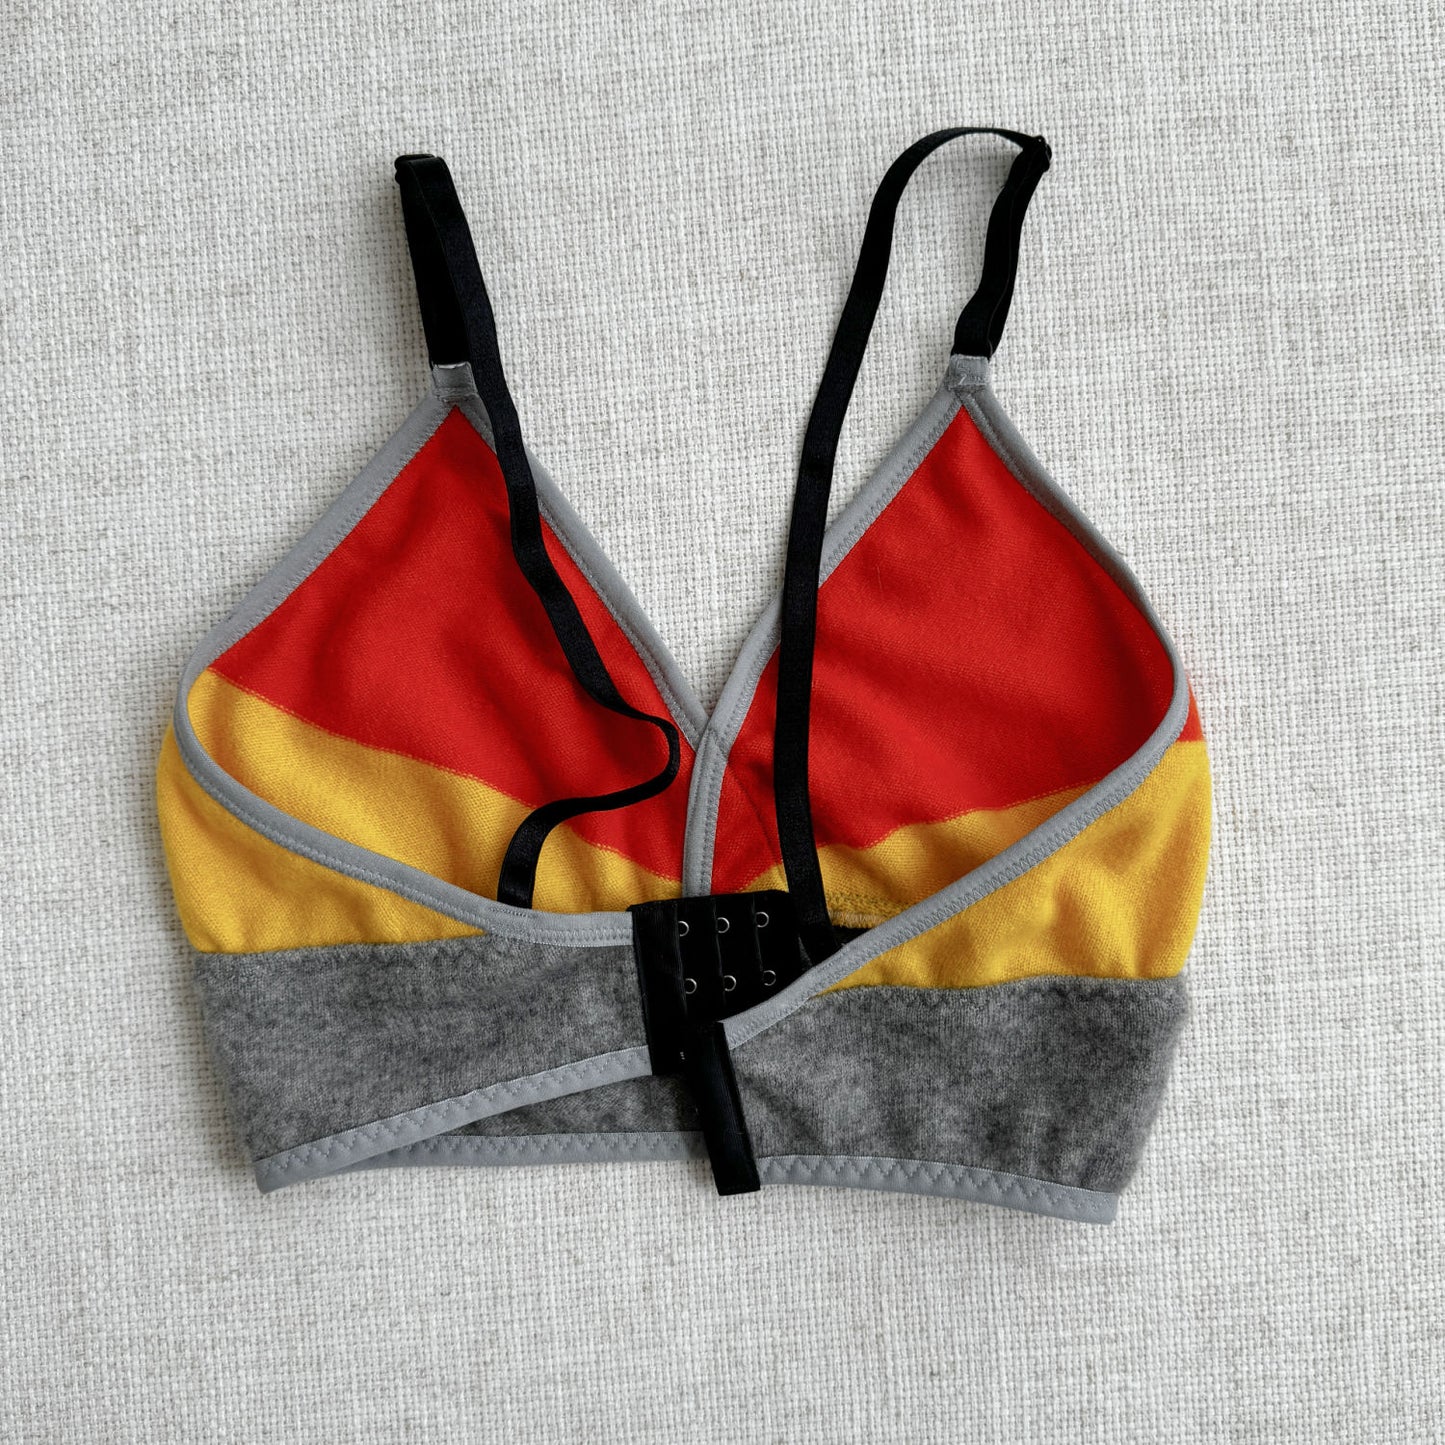 100% cashmere long bra top, vibrant Orange and Yellow with Grey base, made by Econica, Canadian craftsmanship, luxurious feel, eye-catching color combination, handcrafted with care, sustainable luxury, comfortable fit, modern design, natural insulation, artisanal fashion